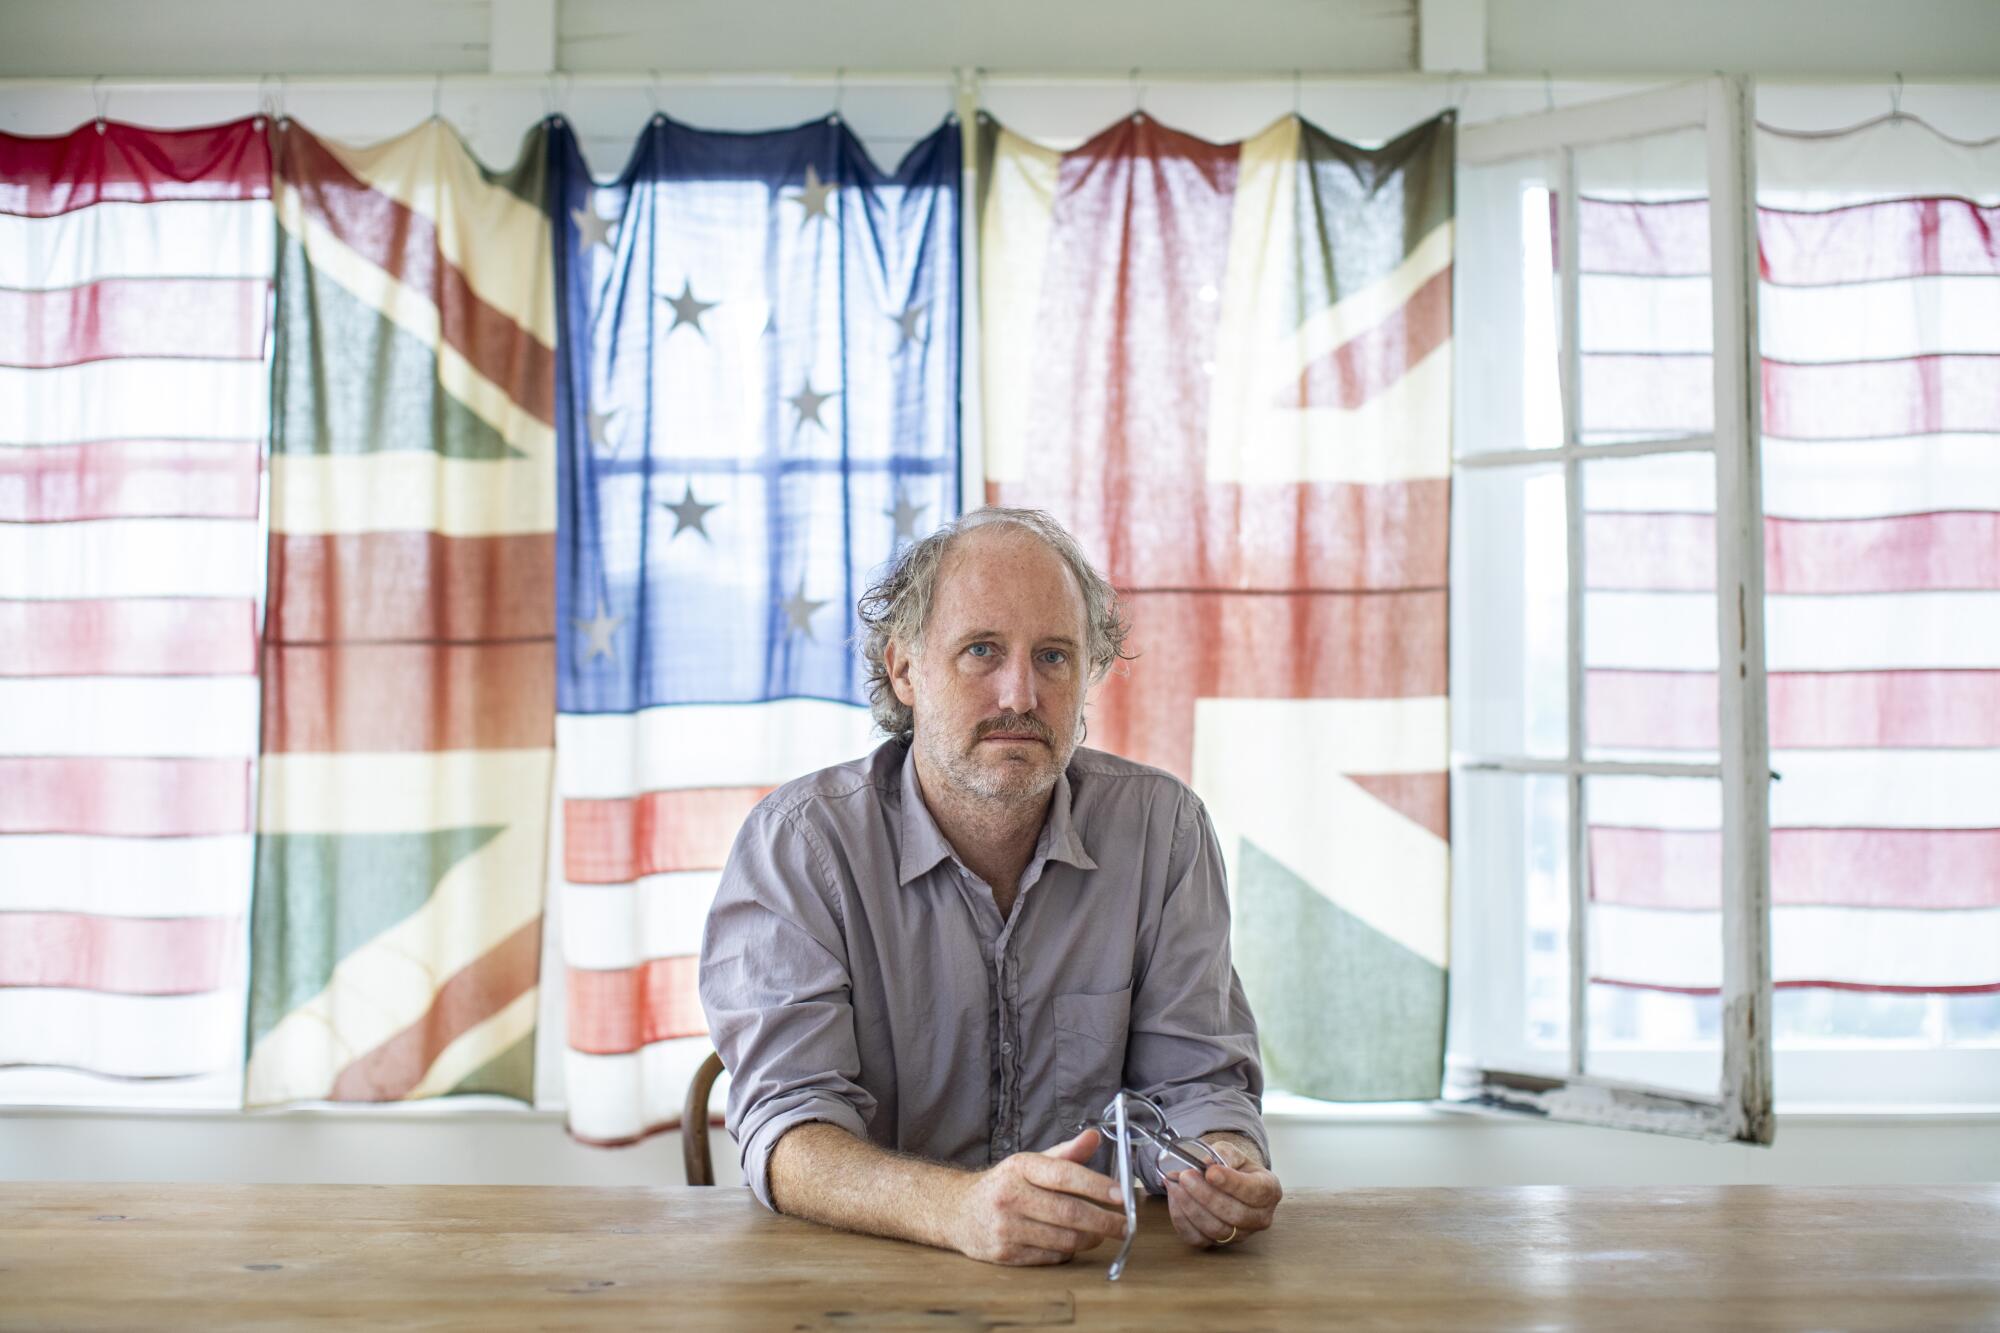 Writer-director Mike Mills sits at a table before windows with curtains resembling national flags. 